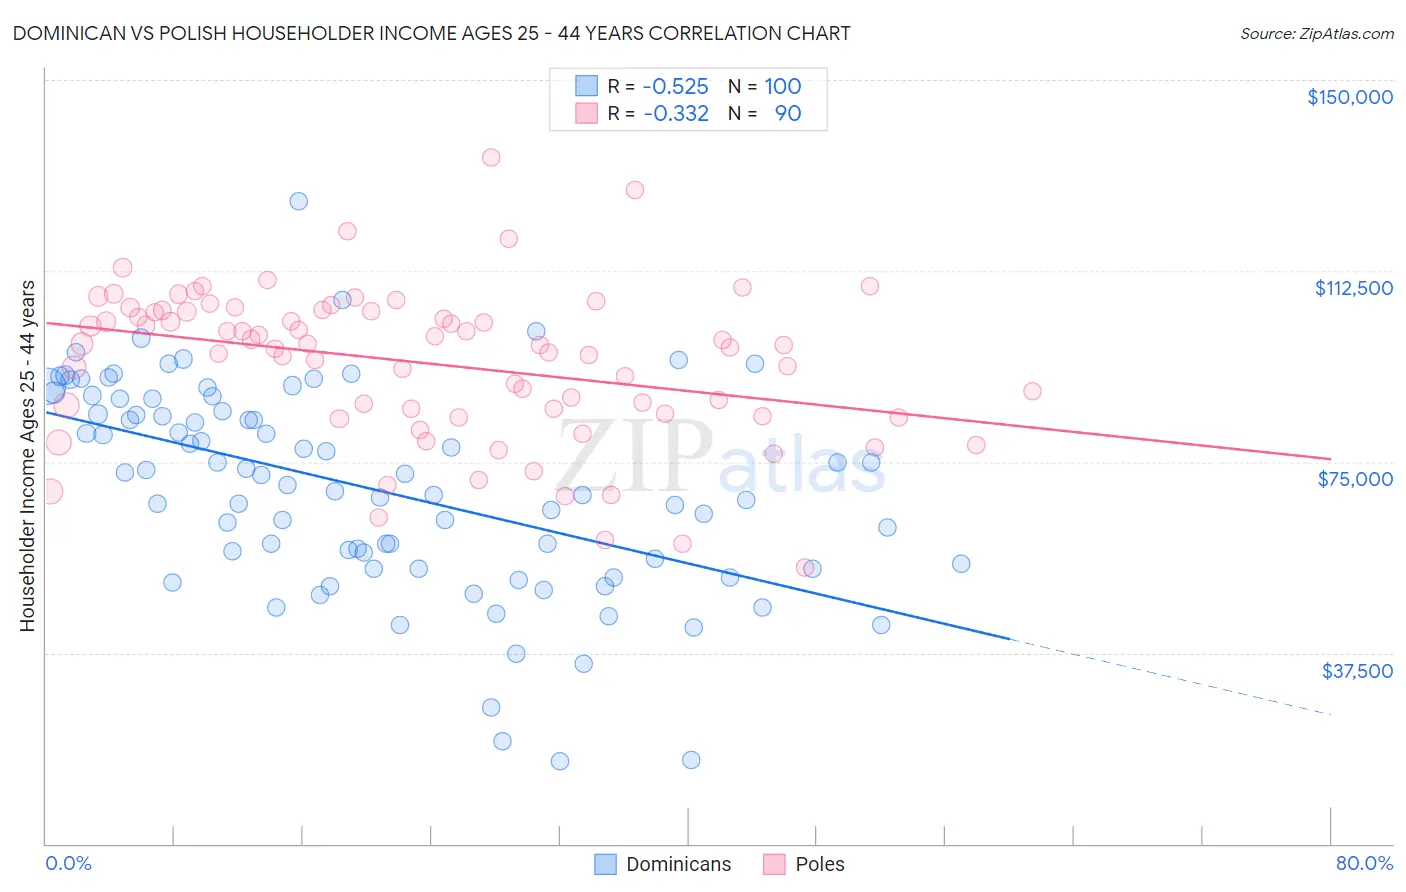 Dominican vs Polish Householder Income Ages 25 - 44 years